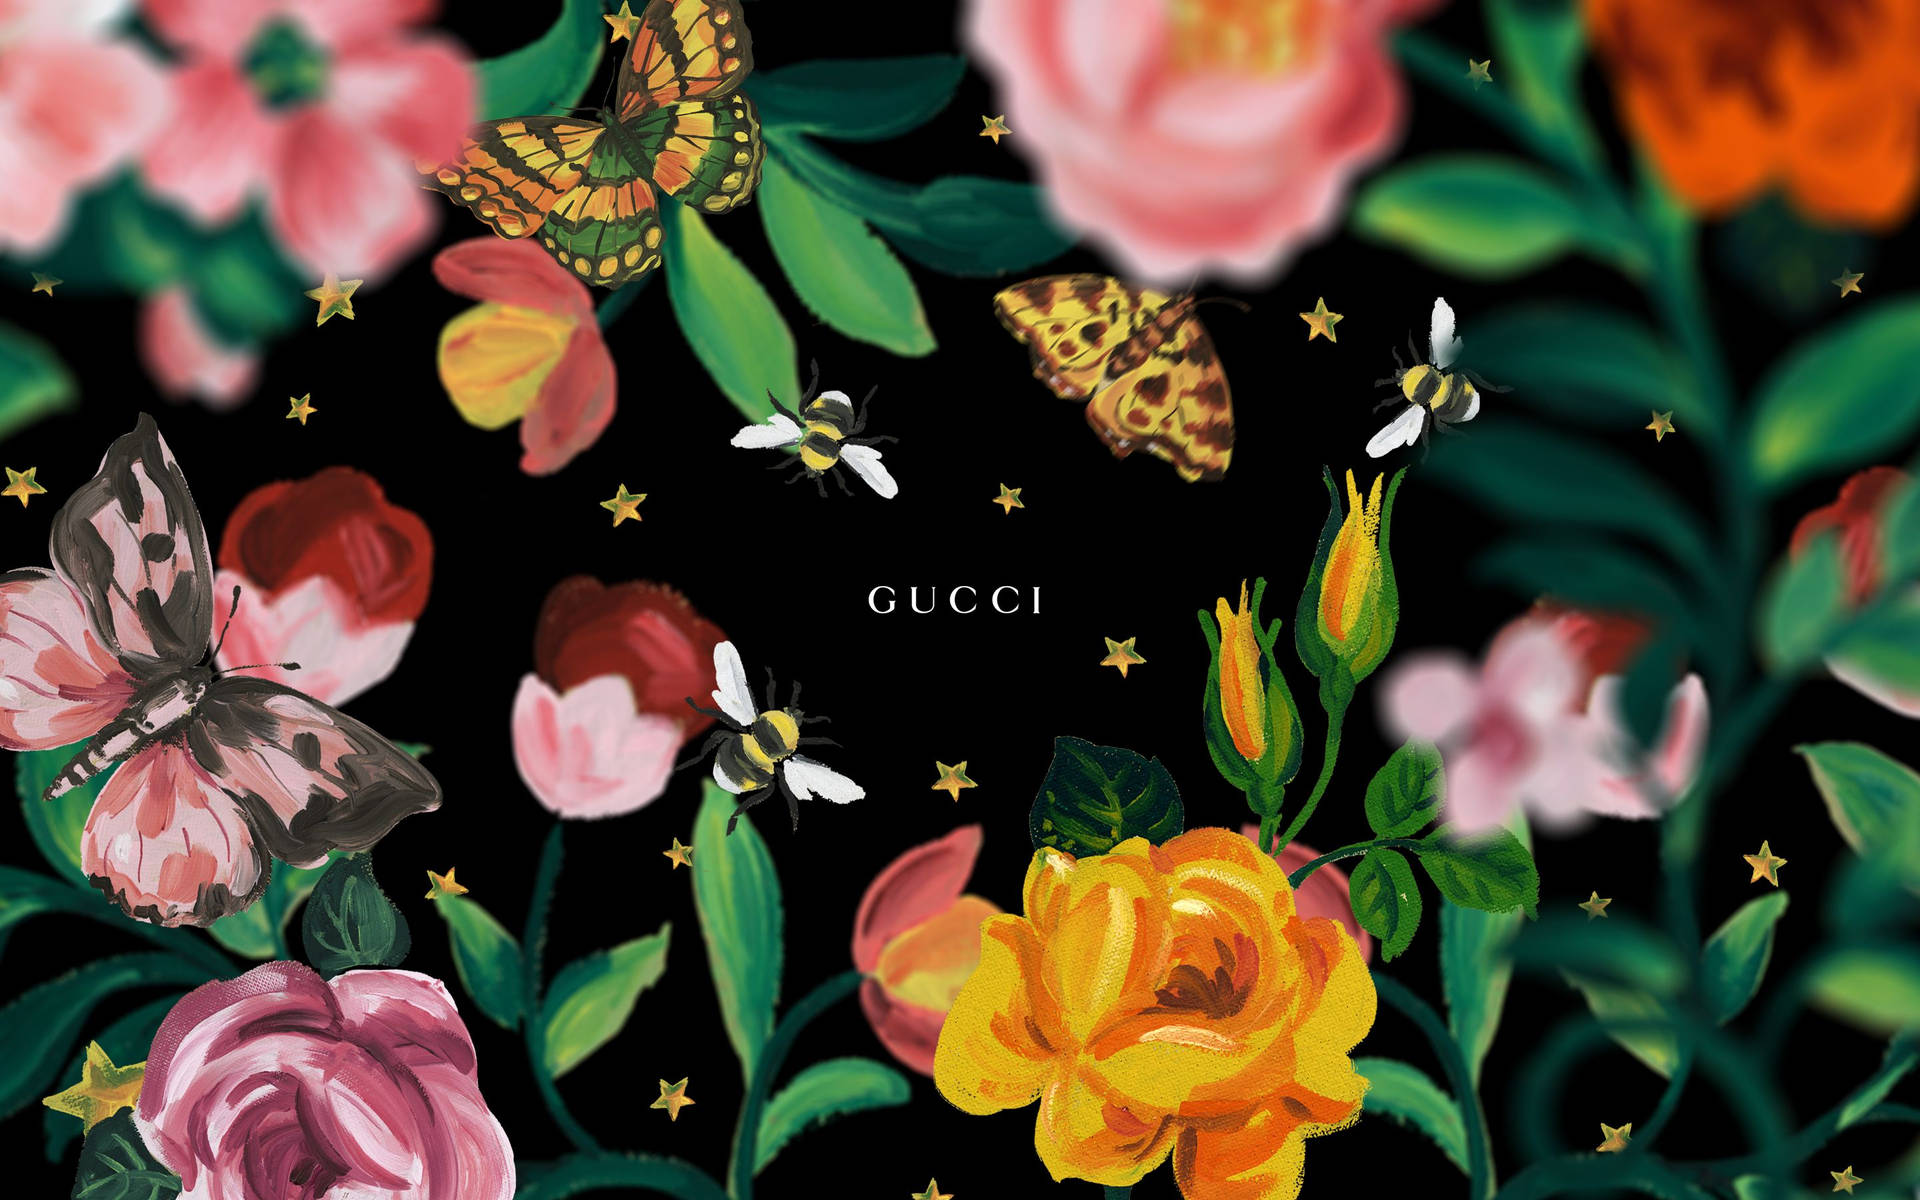 Free Gucci Wallpaper Downloads, [200+] Gucci Wallpapers for FREE |  